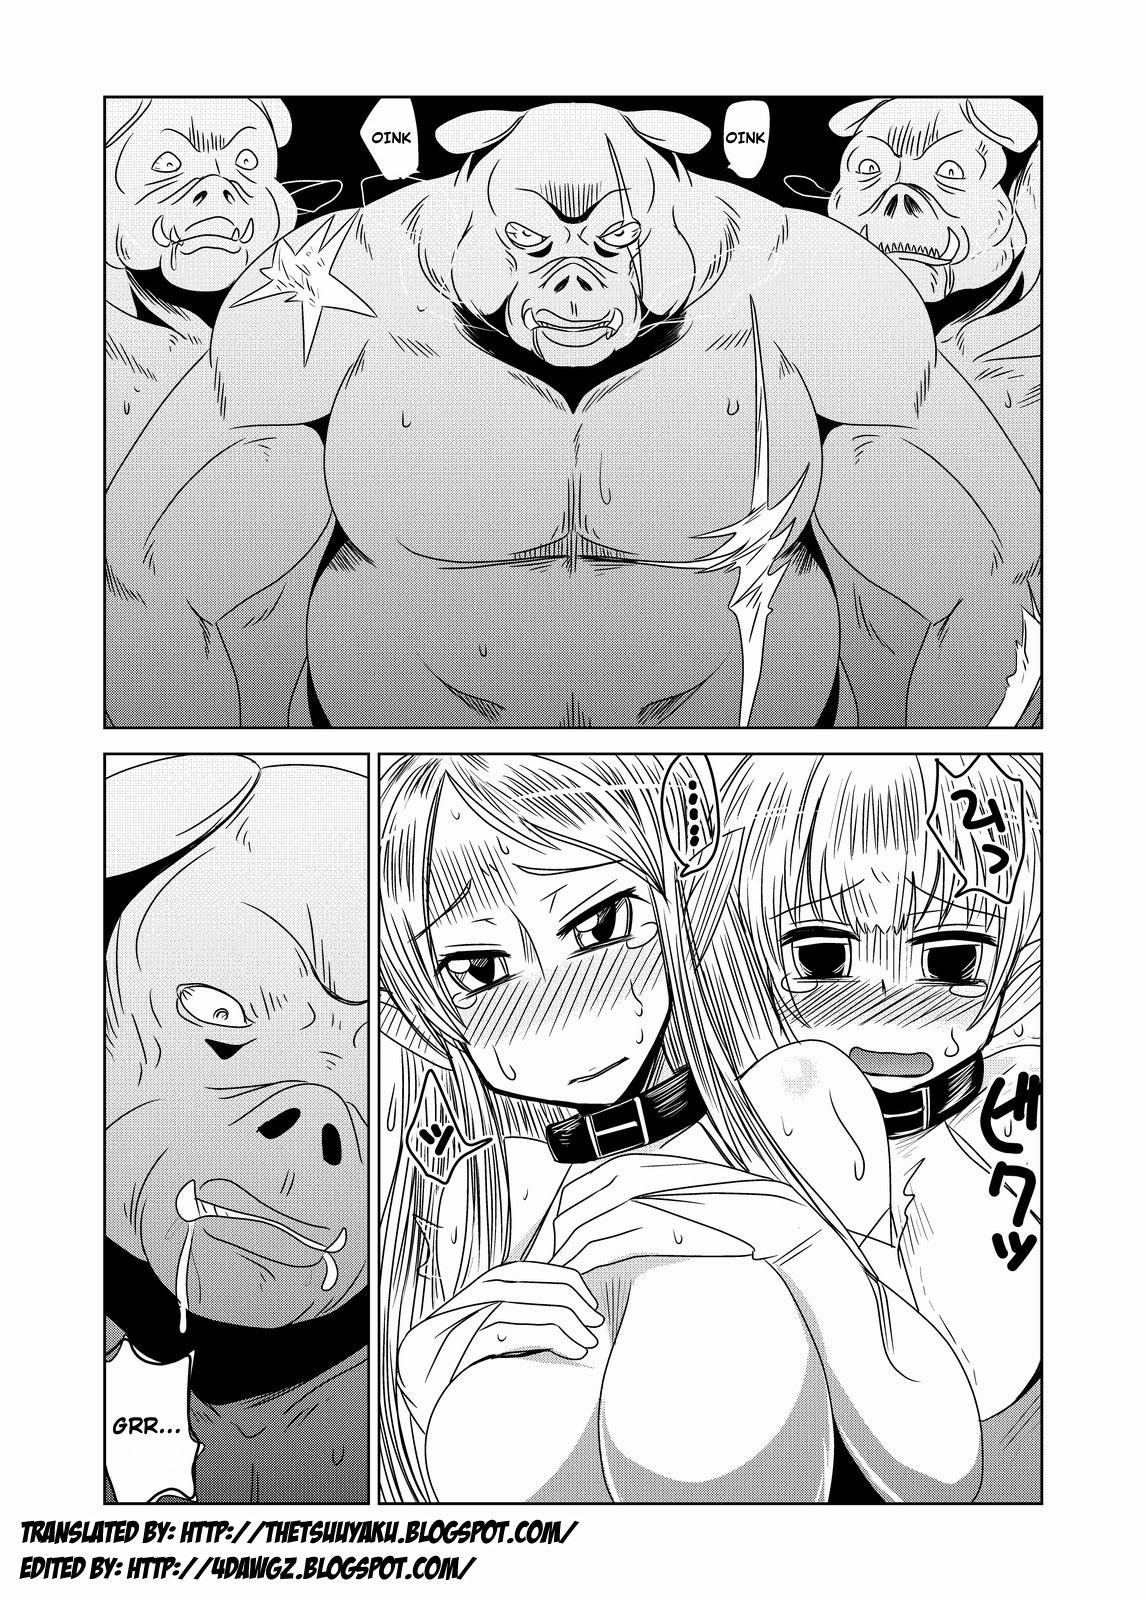 Tight Pussy Fuck Orc Dakara Elf Osotta Zenin Succubus Datta wa. | We Assaulted Some Elves Because We're Orcs But It Turns Out They Were All Actually Succubi Fingering - Page 2